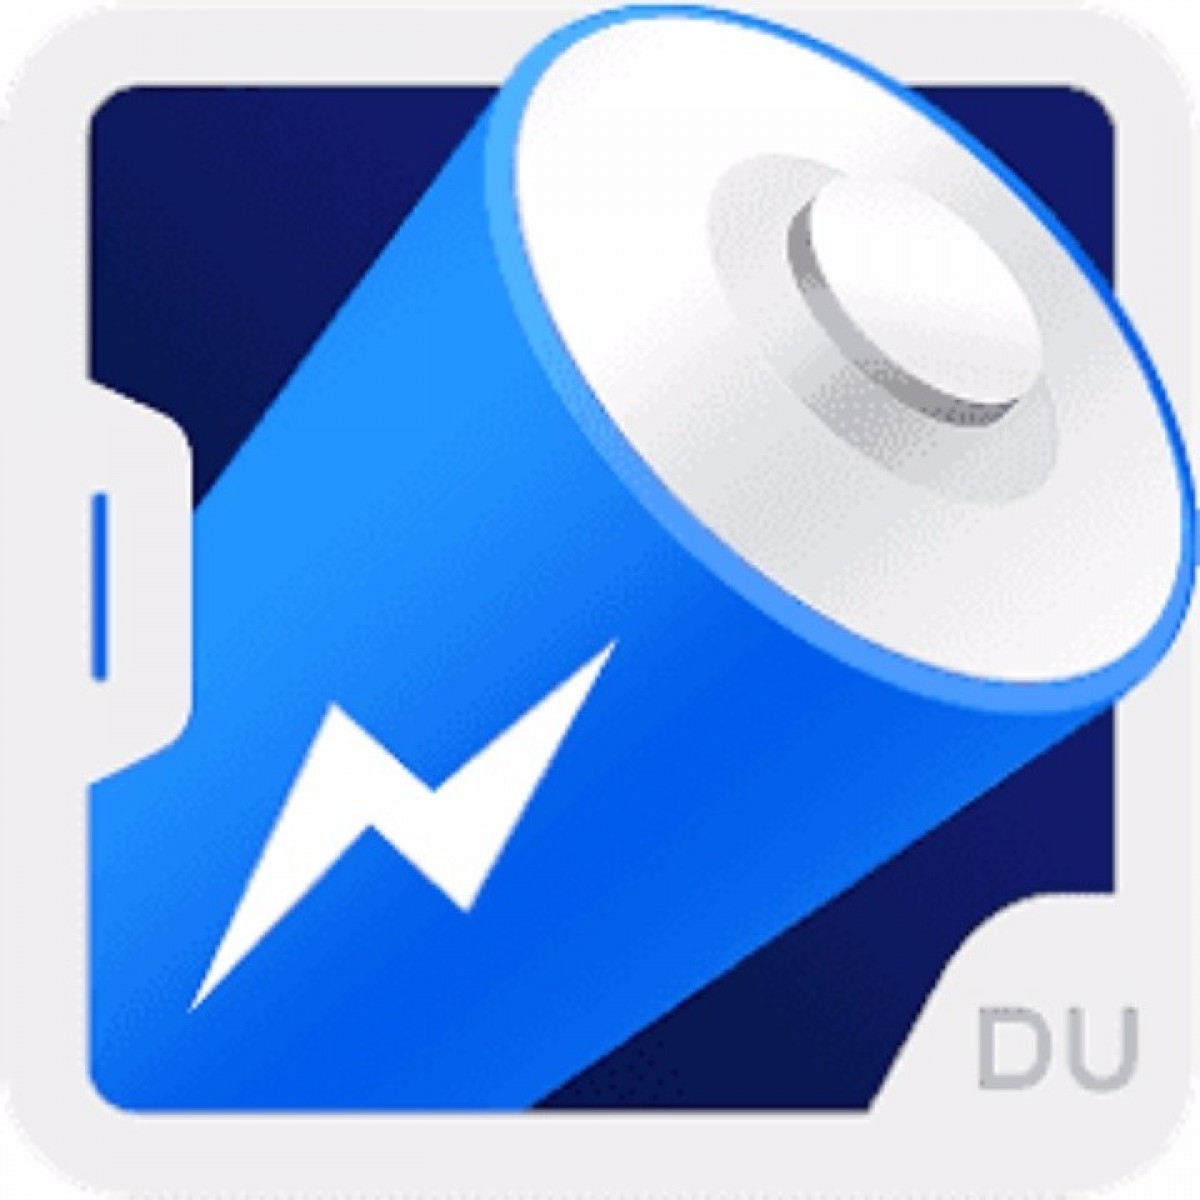 Download Du Battery Saver Pro For Android huntersever